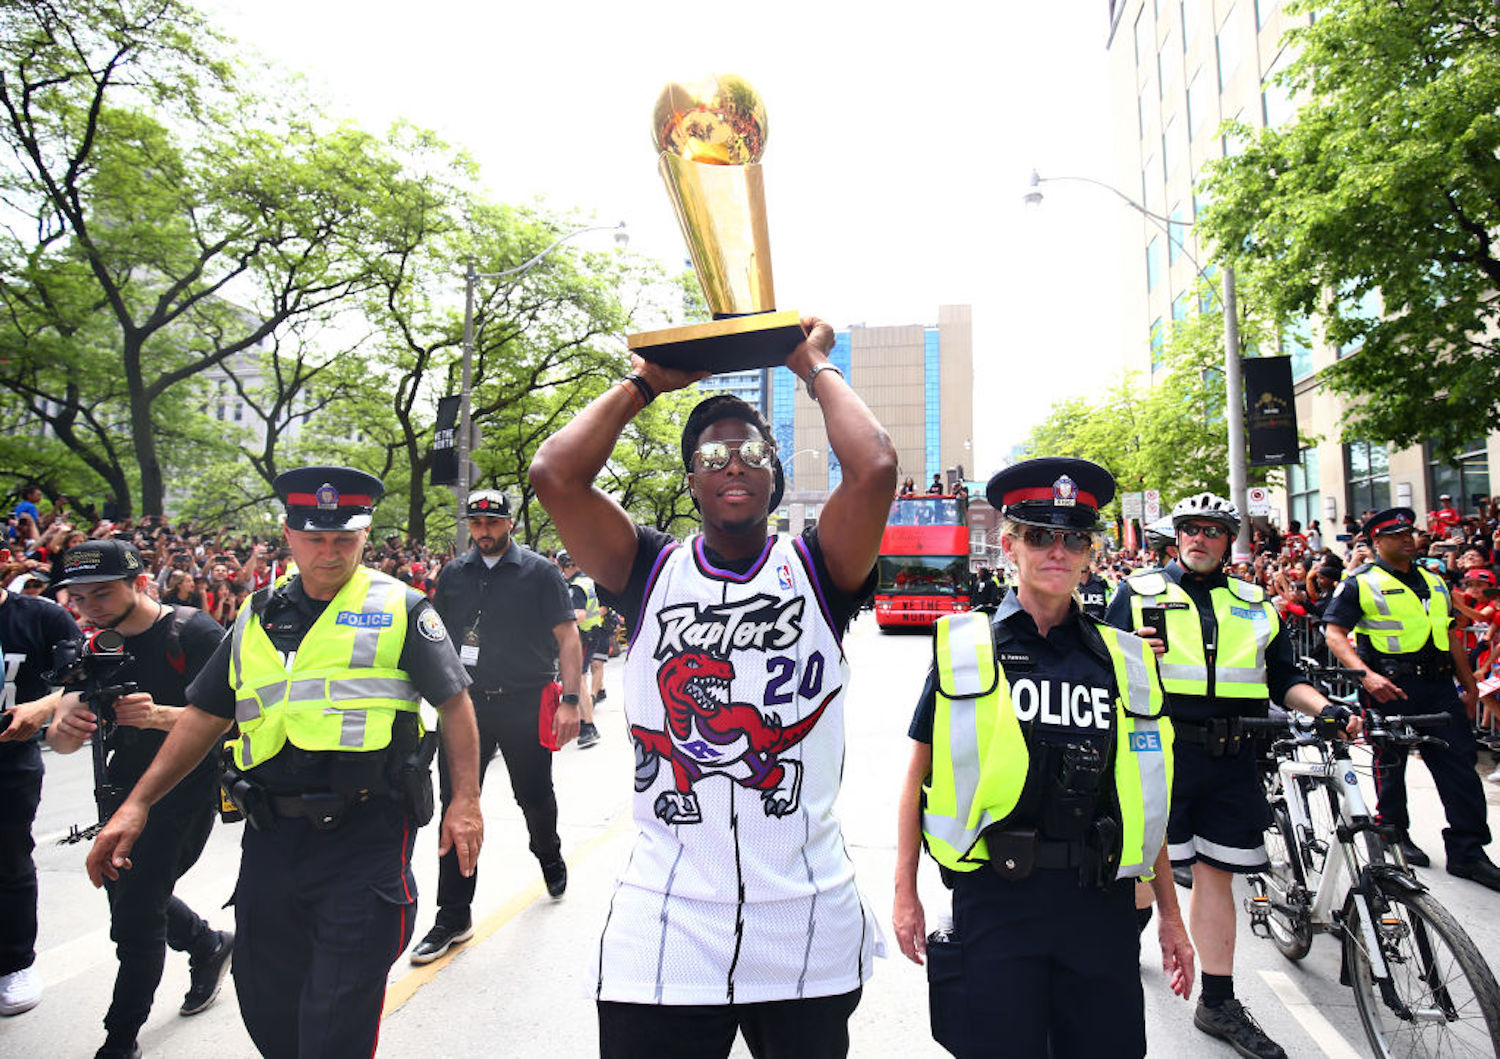 Kyle Lowry is a six-time All-Star and an NBA champion, but he's not regarded as a surefire Hall of Famer. Well, maybe he should be.